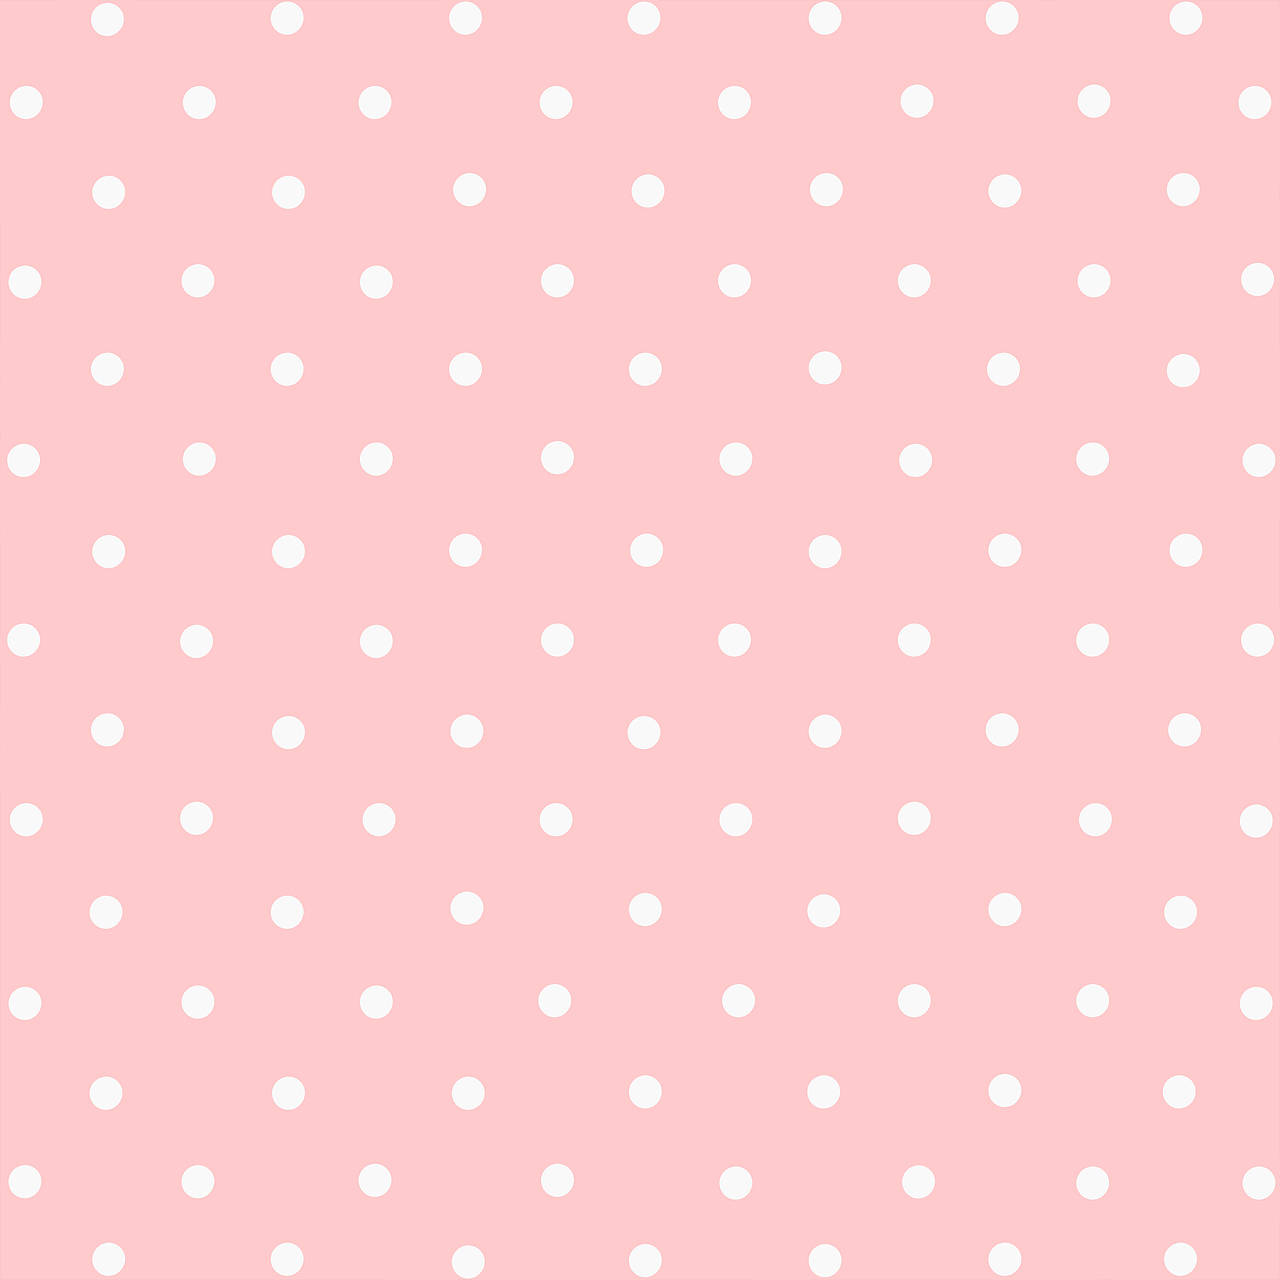 Light Pink And White Polka Dots Wallpaper